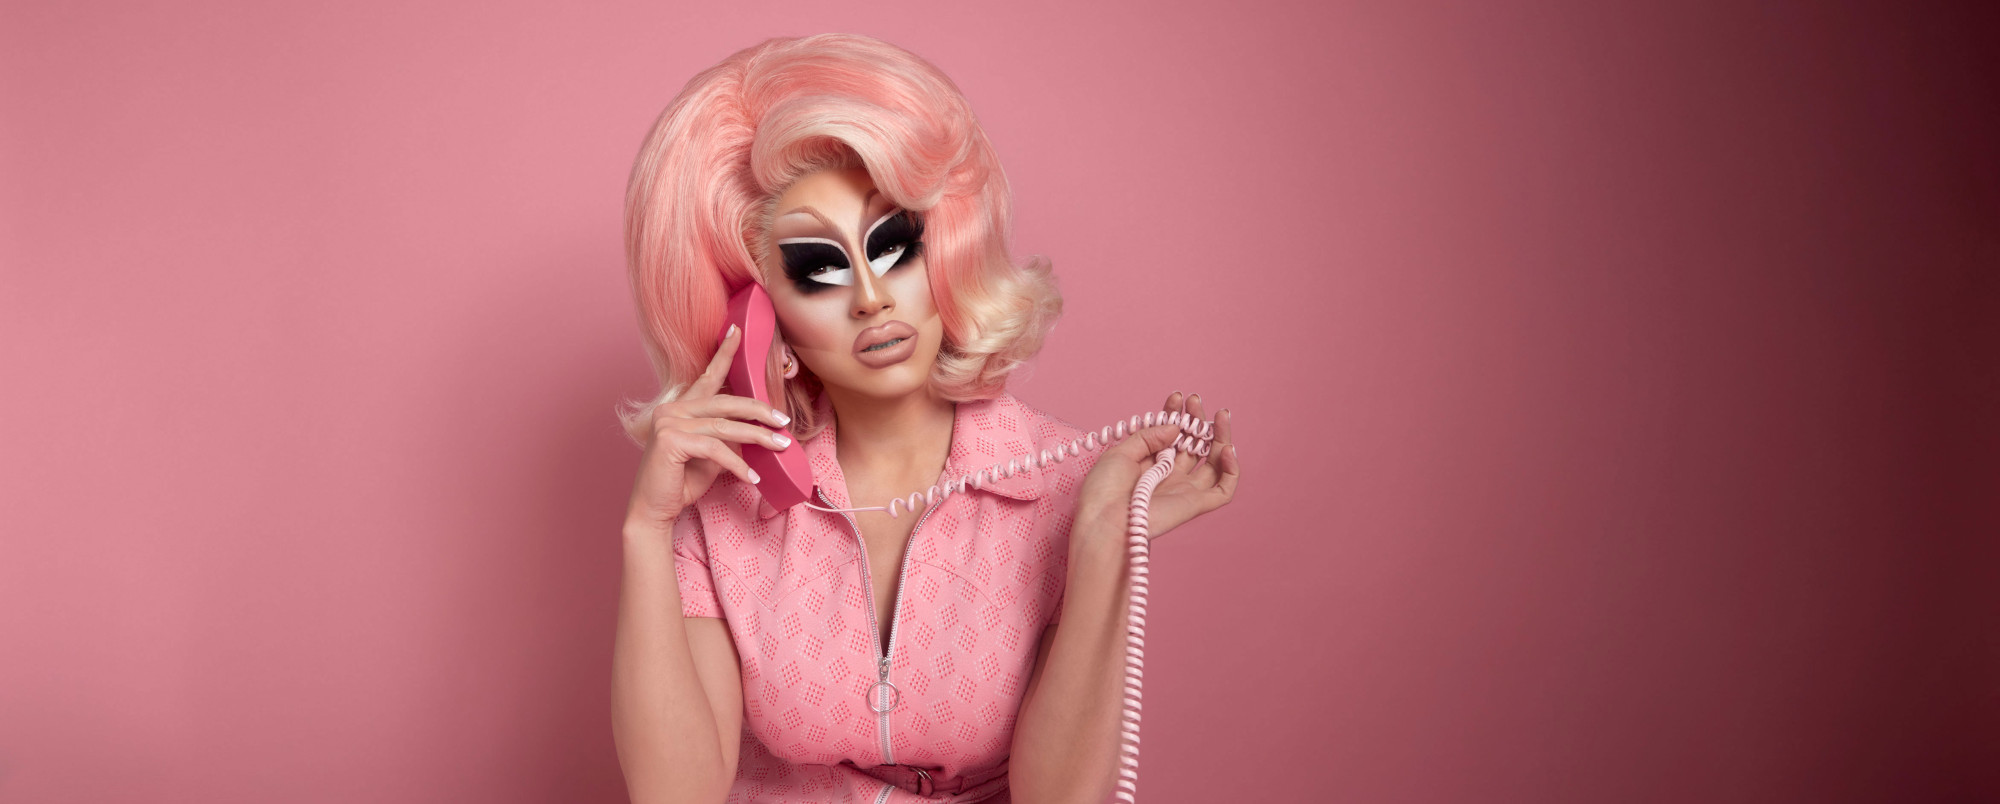 Trixie Mattel Plays with the Power of Duality on Irresistable New Double Album